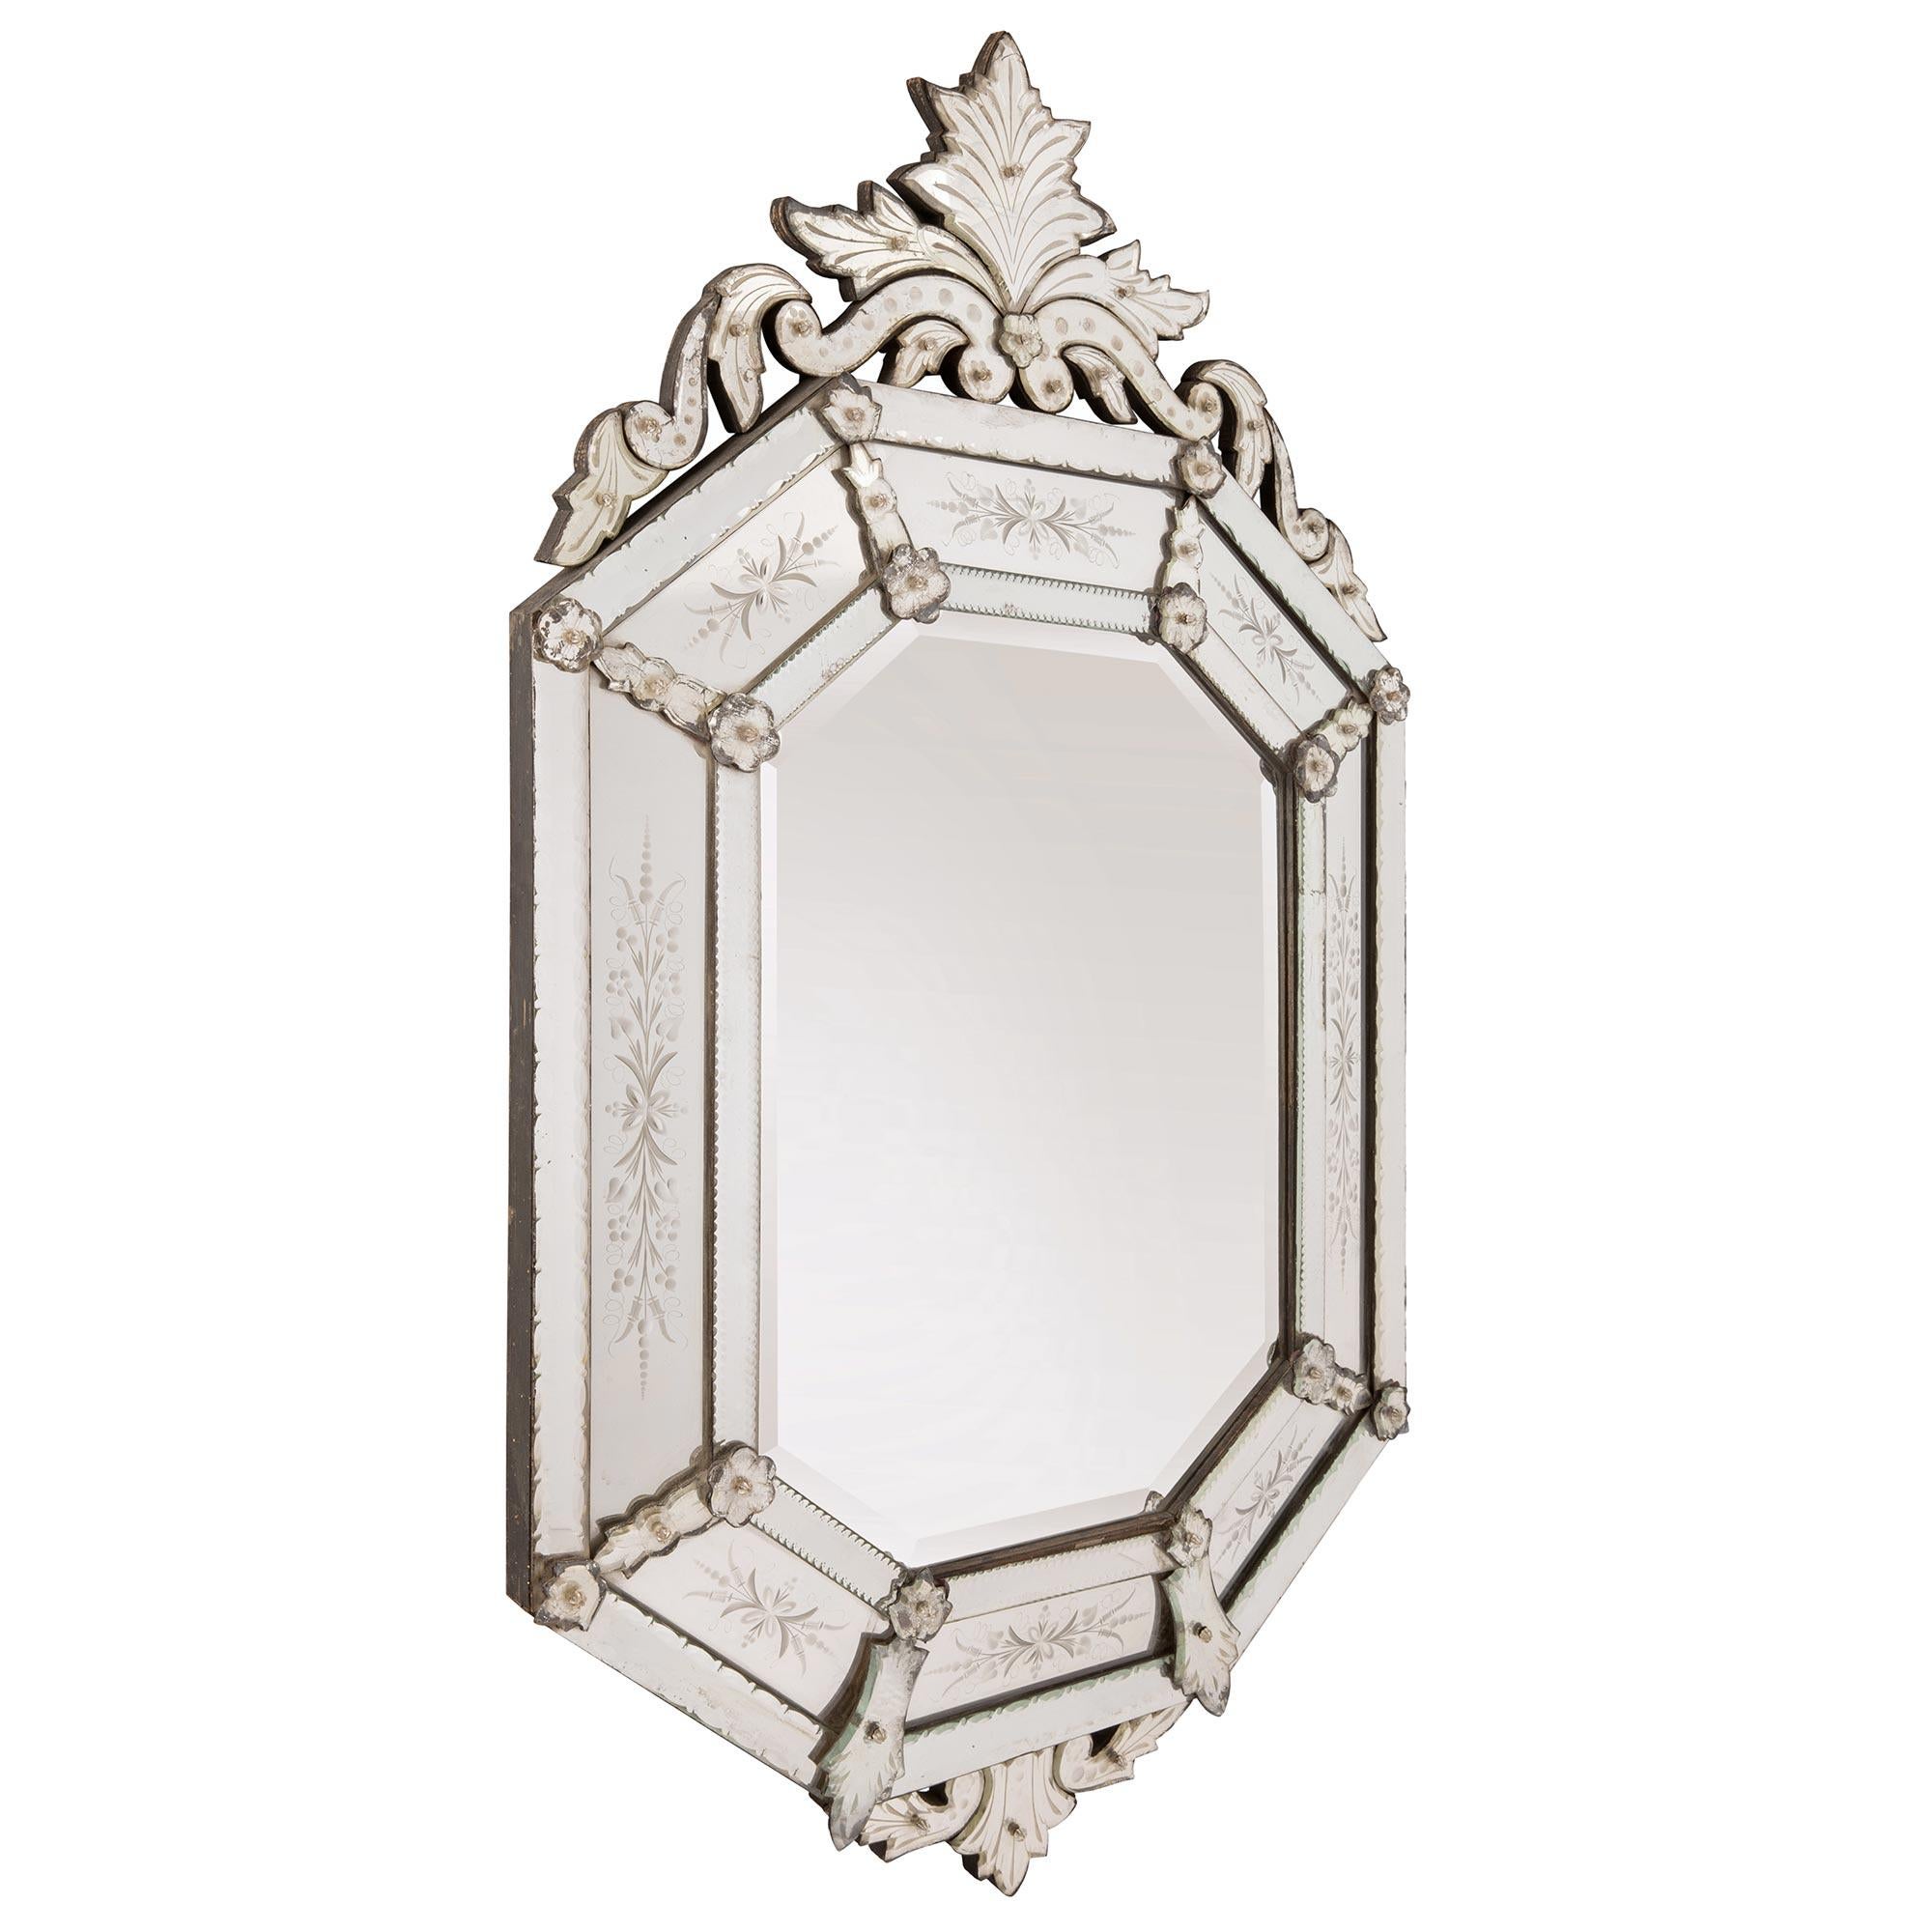 A striking Italian turn of century Venetian st. double framed mirror. The octagonal shaped mirror retains all of its original mirror plates throughout with the central mirror plate displaying a most decorative beveled edge and framed within straight